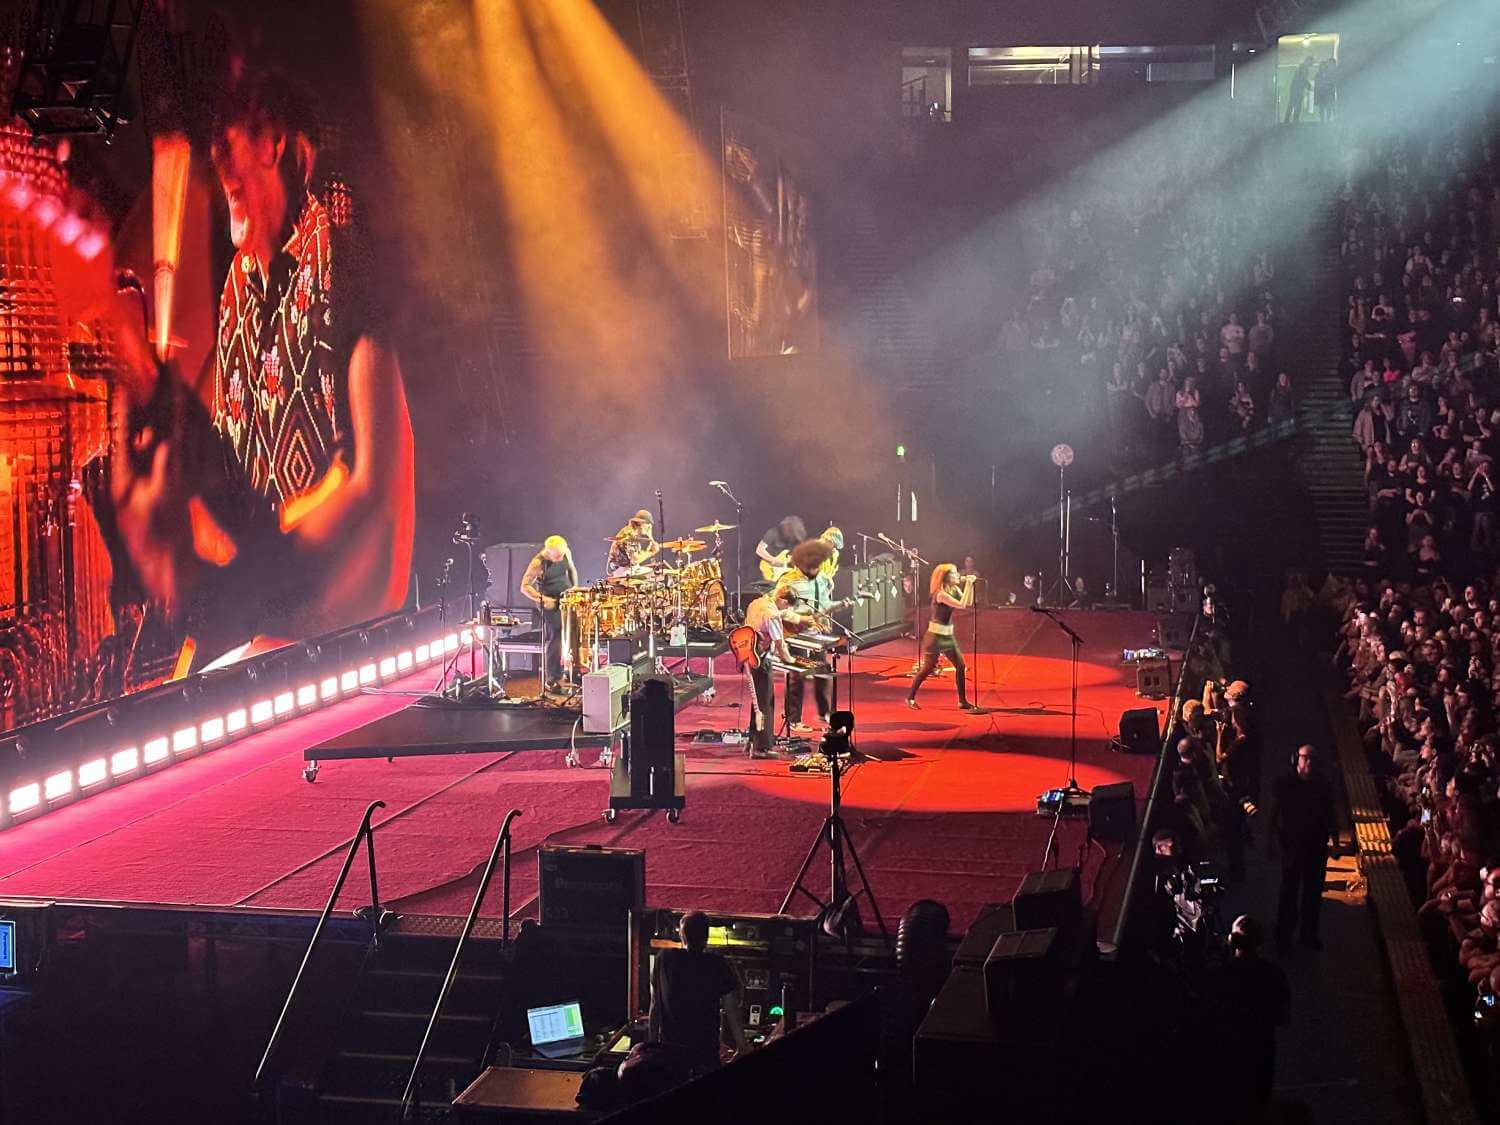 View of Paramore at Manchester Arena from Seat Block 101, Row K, Seat 12